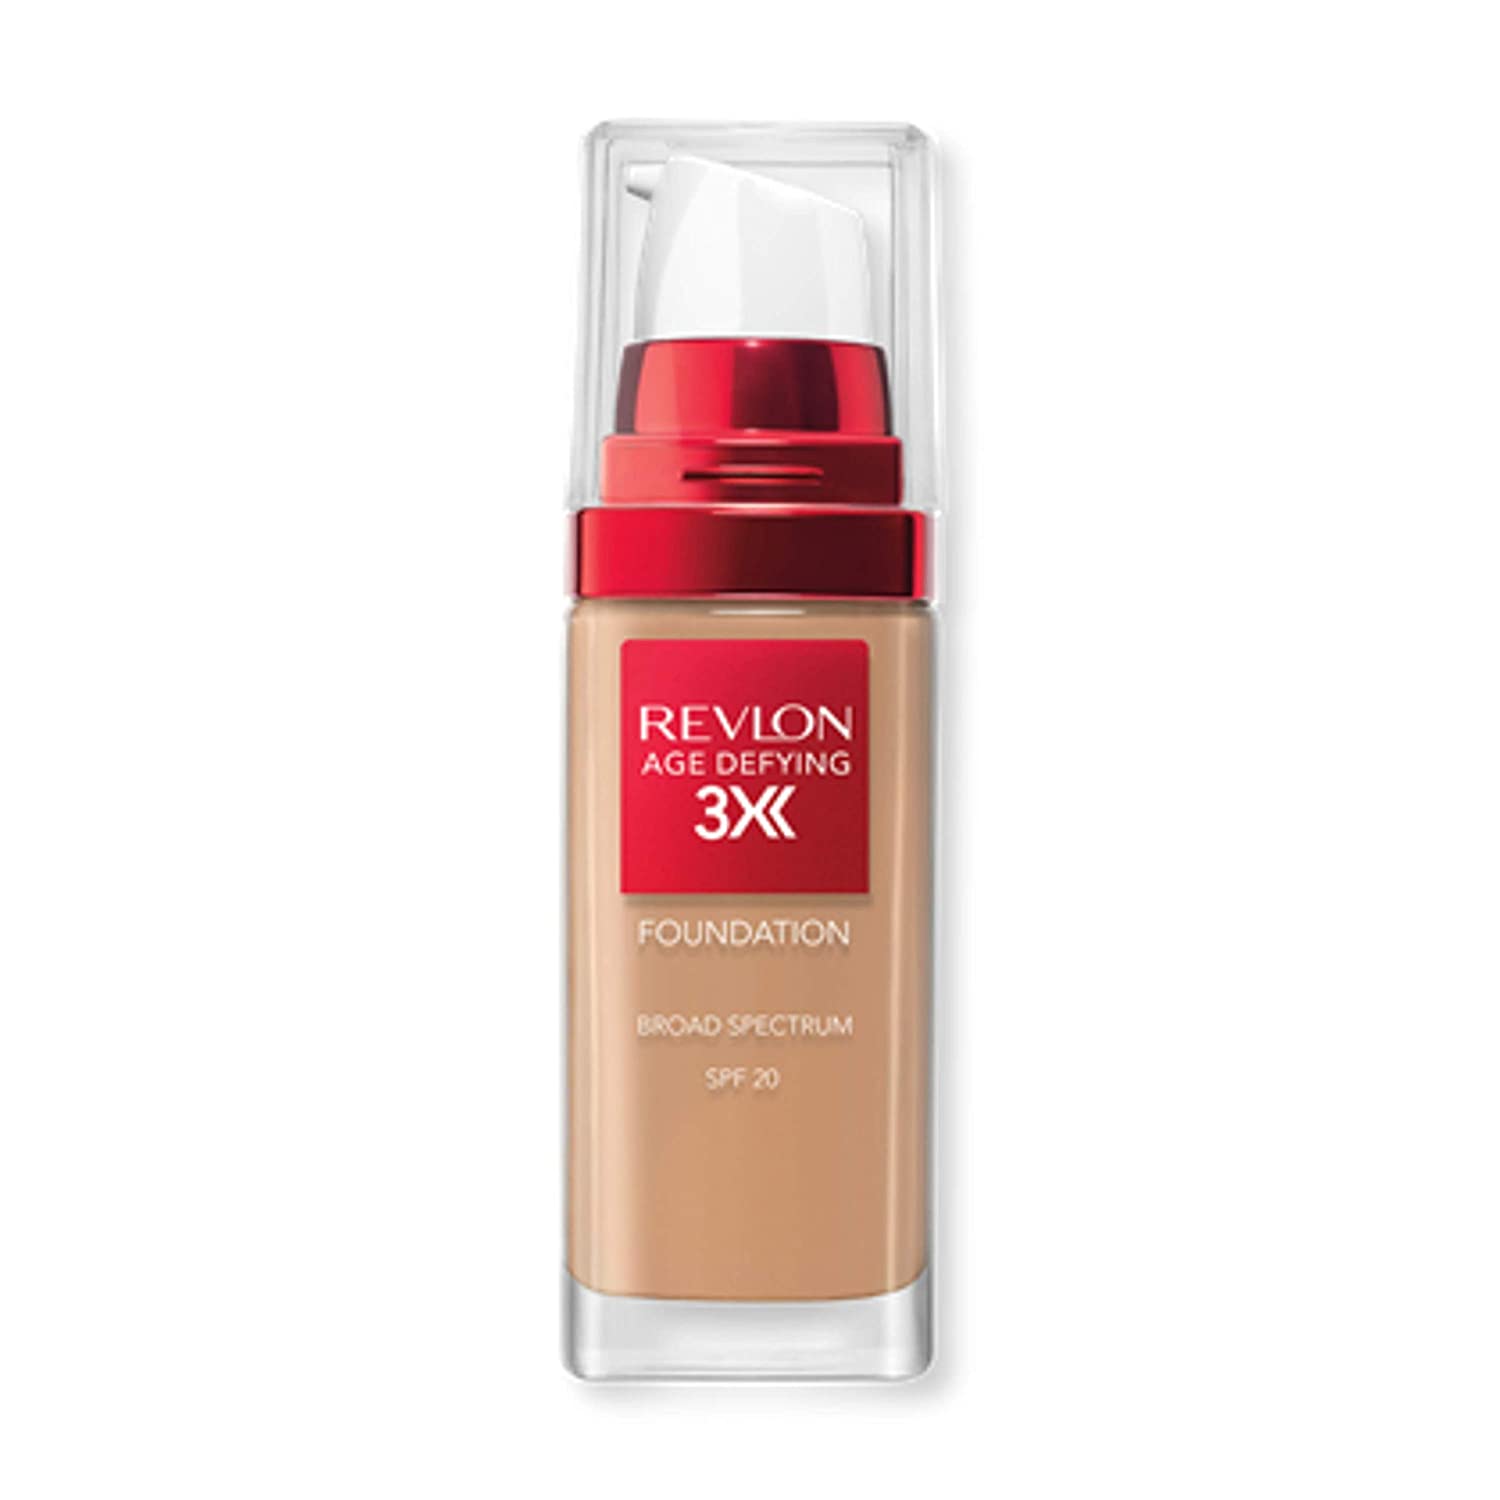 Revlon Age Defying 3X Makeup Foundation, Firming, Lifting and Anti-Aging